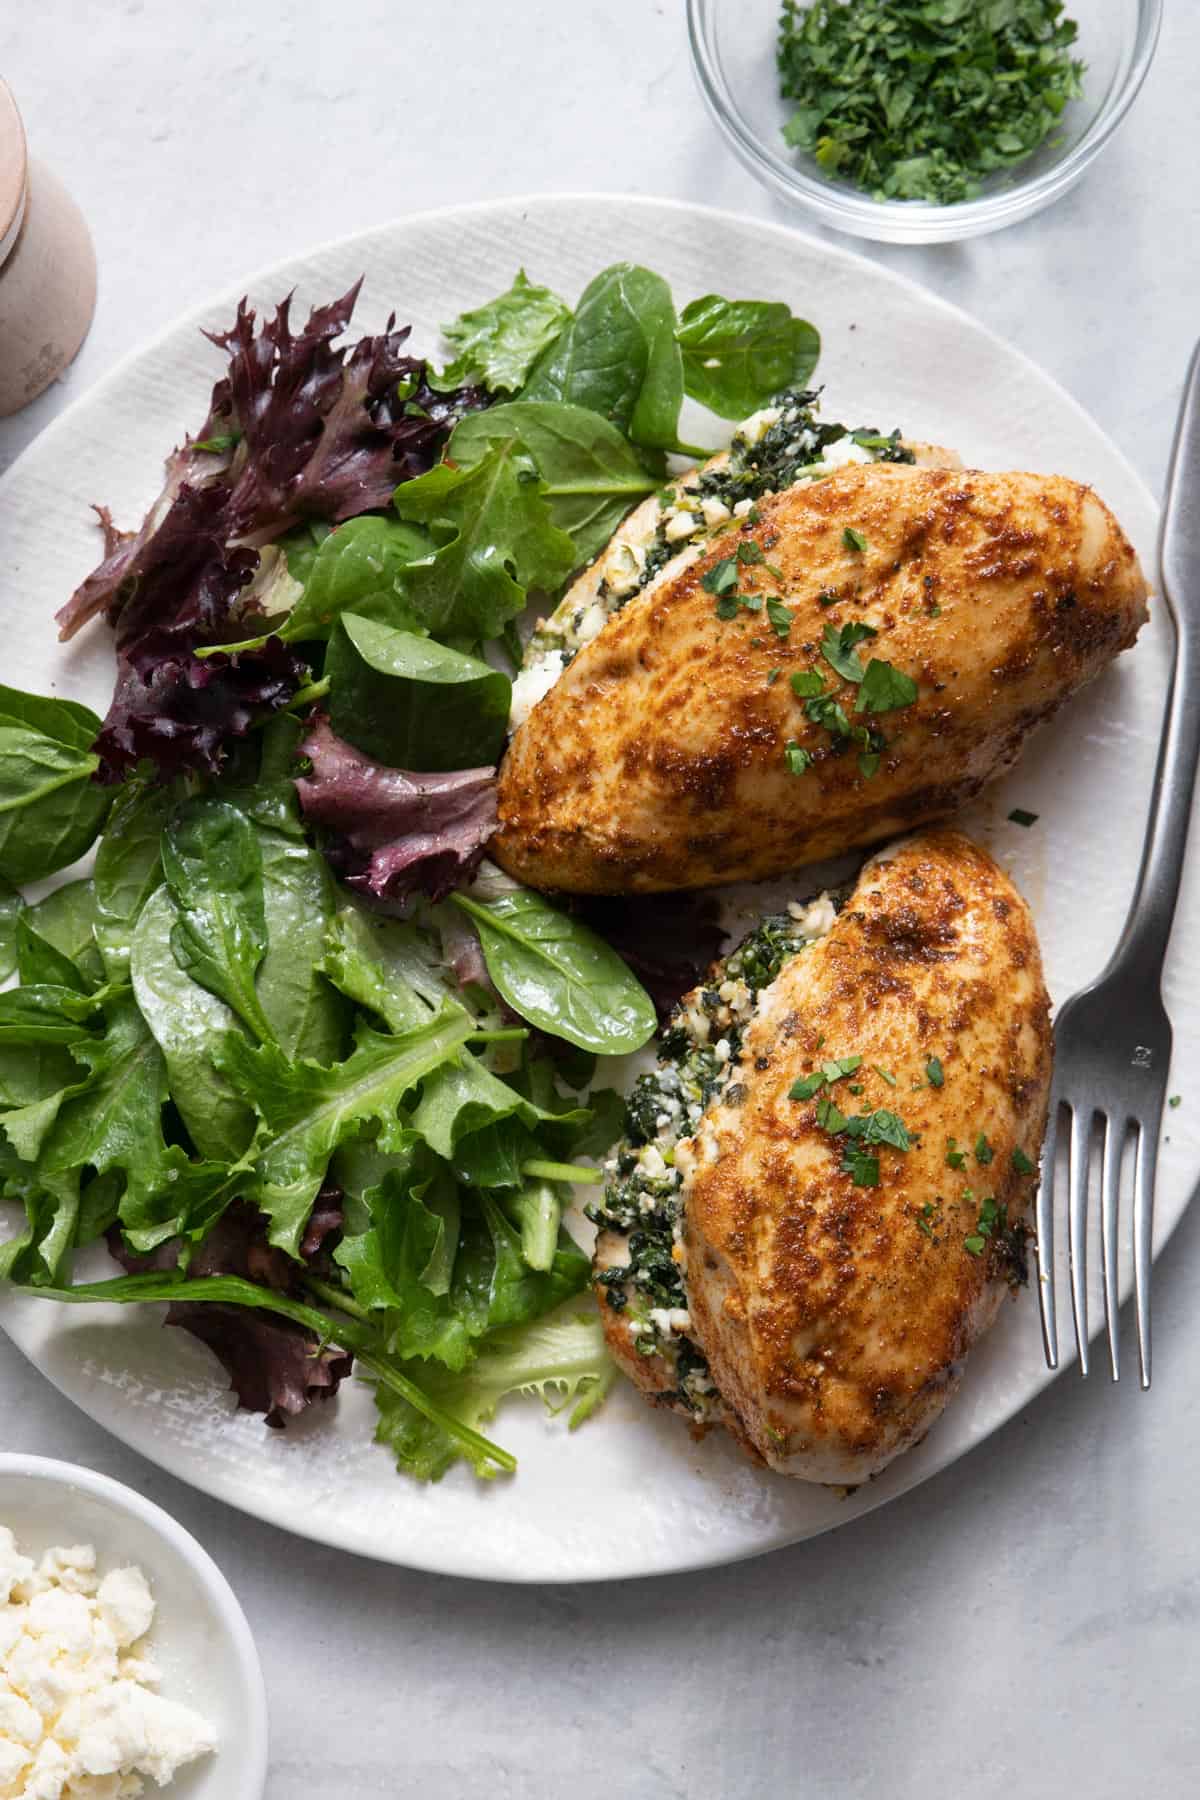 Spinach & Feta Stuffed Chicken served with mixed greens on white plate